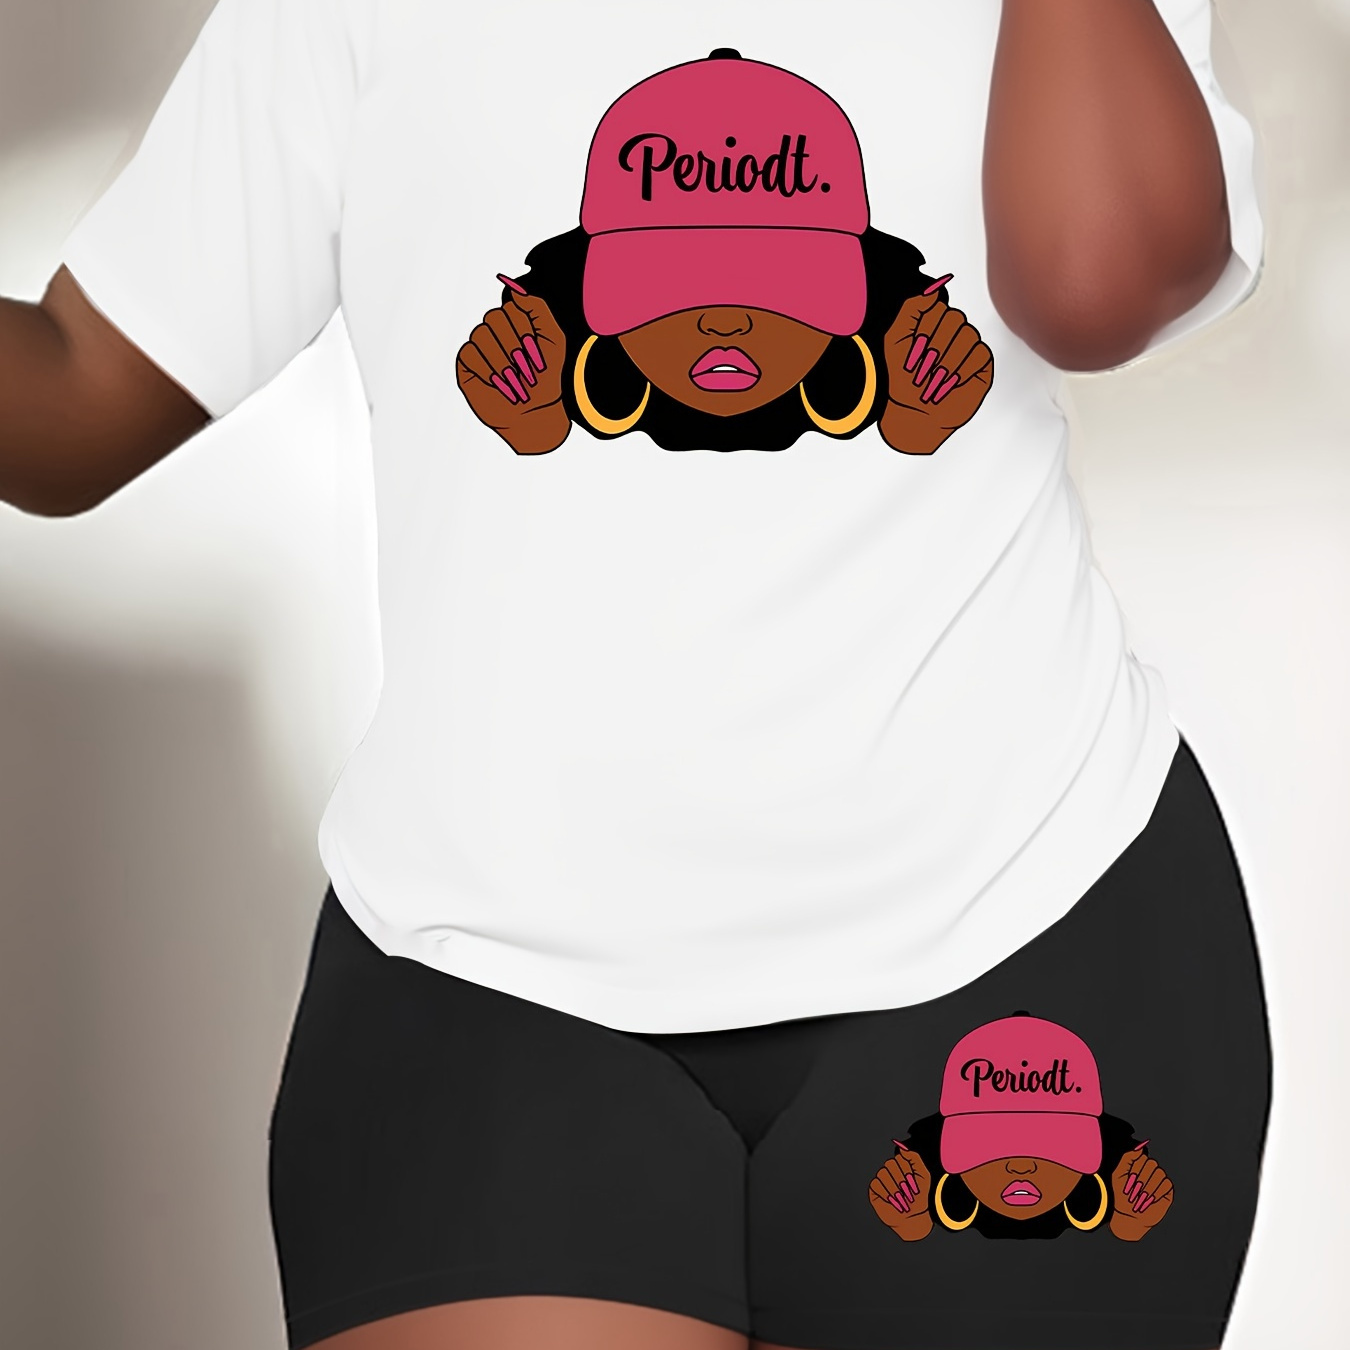 

Women's 2-piece Plus Size Sport Set, White T-shirt With Bold "periodt." Graphic & Matching Shorts, Comfortable Casual Summer Outfit